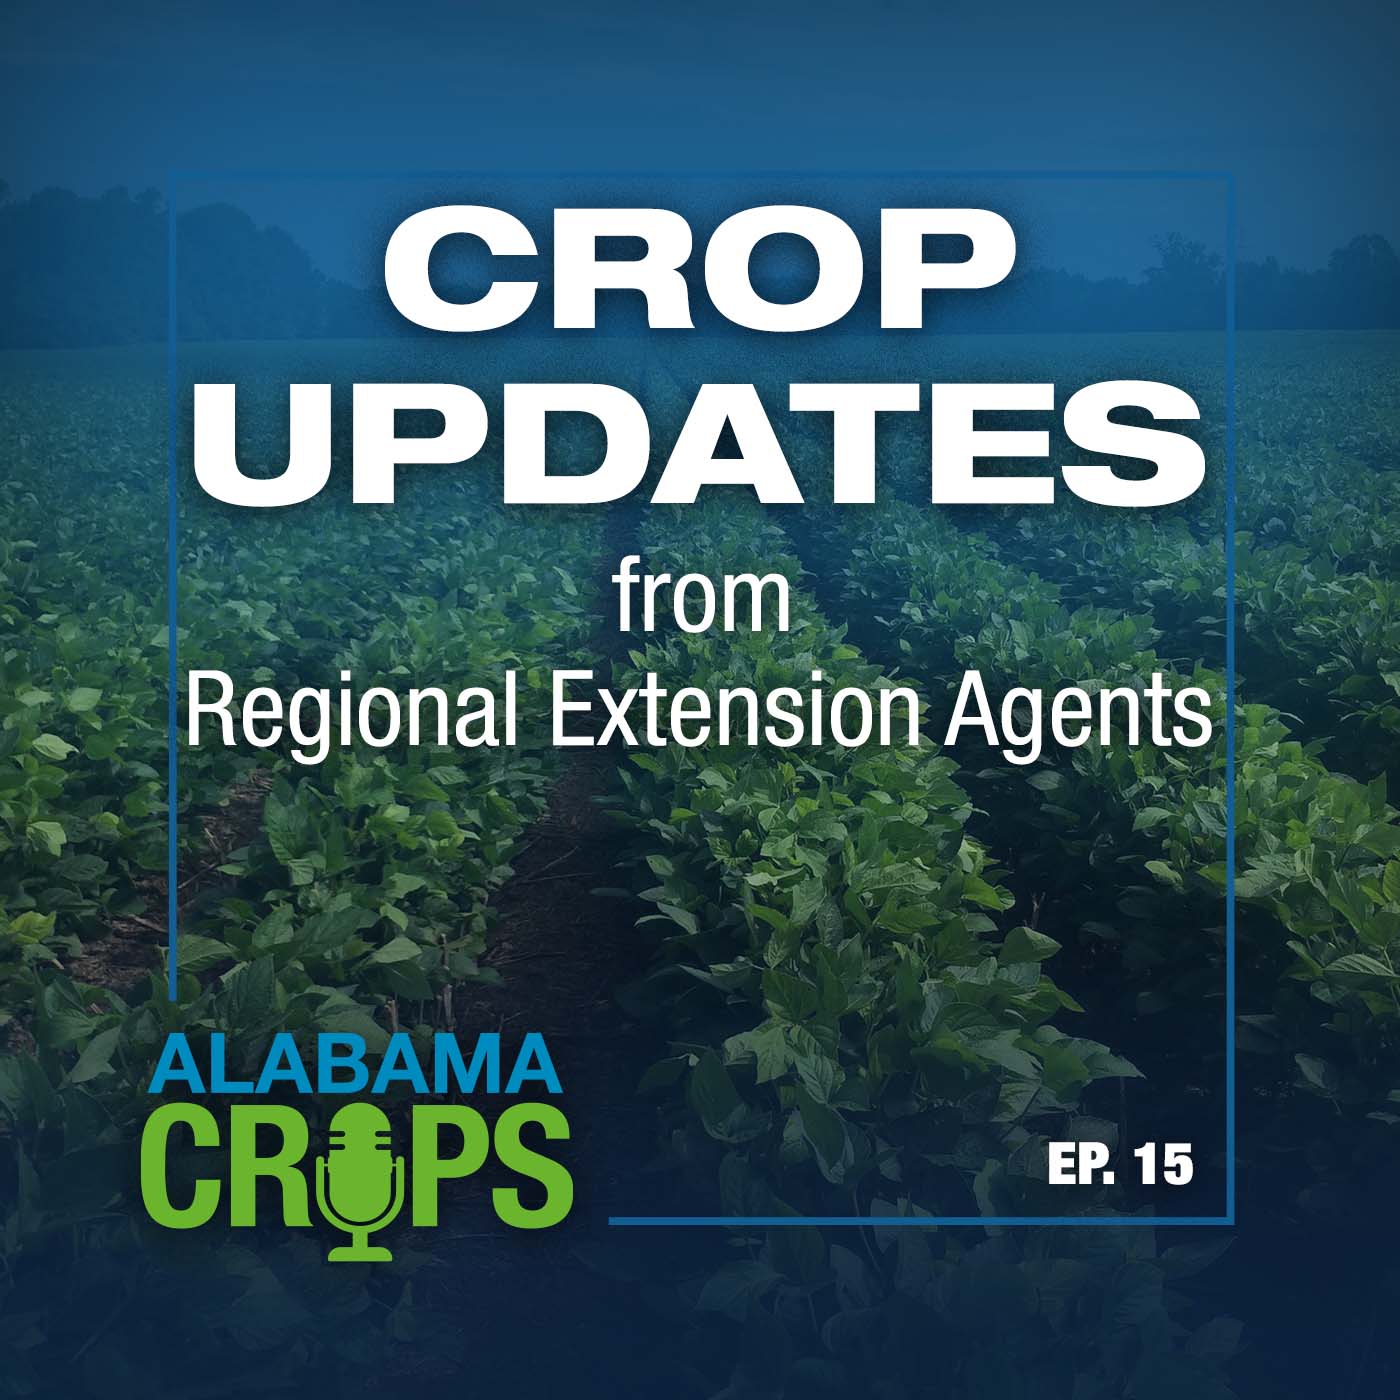 Crop Updates from Regional Extension Agents